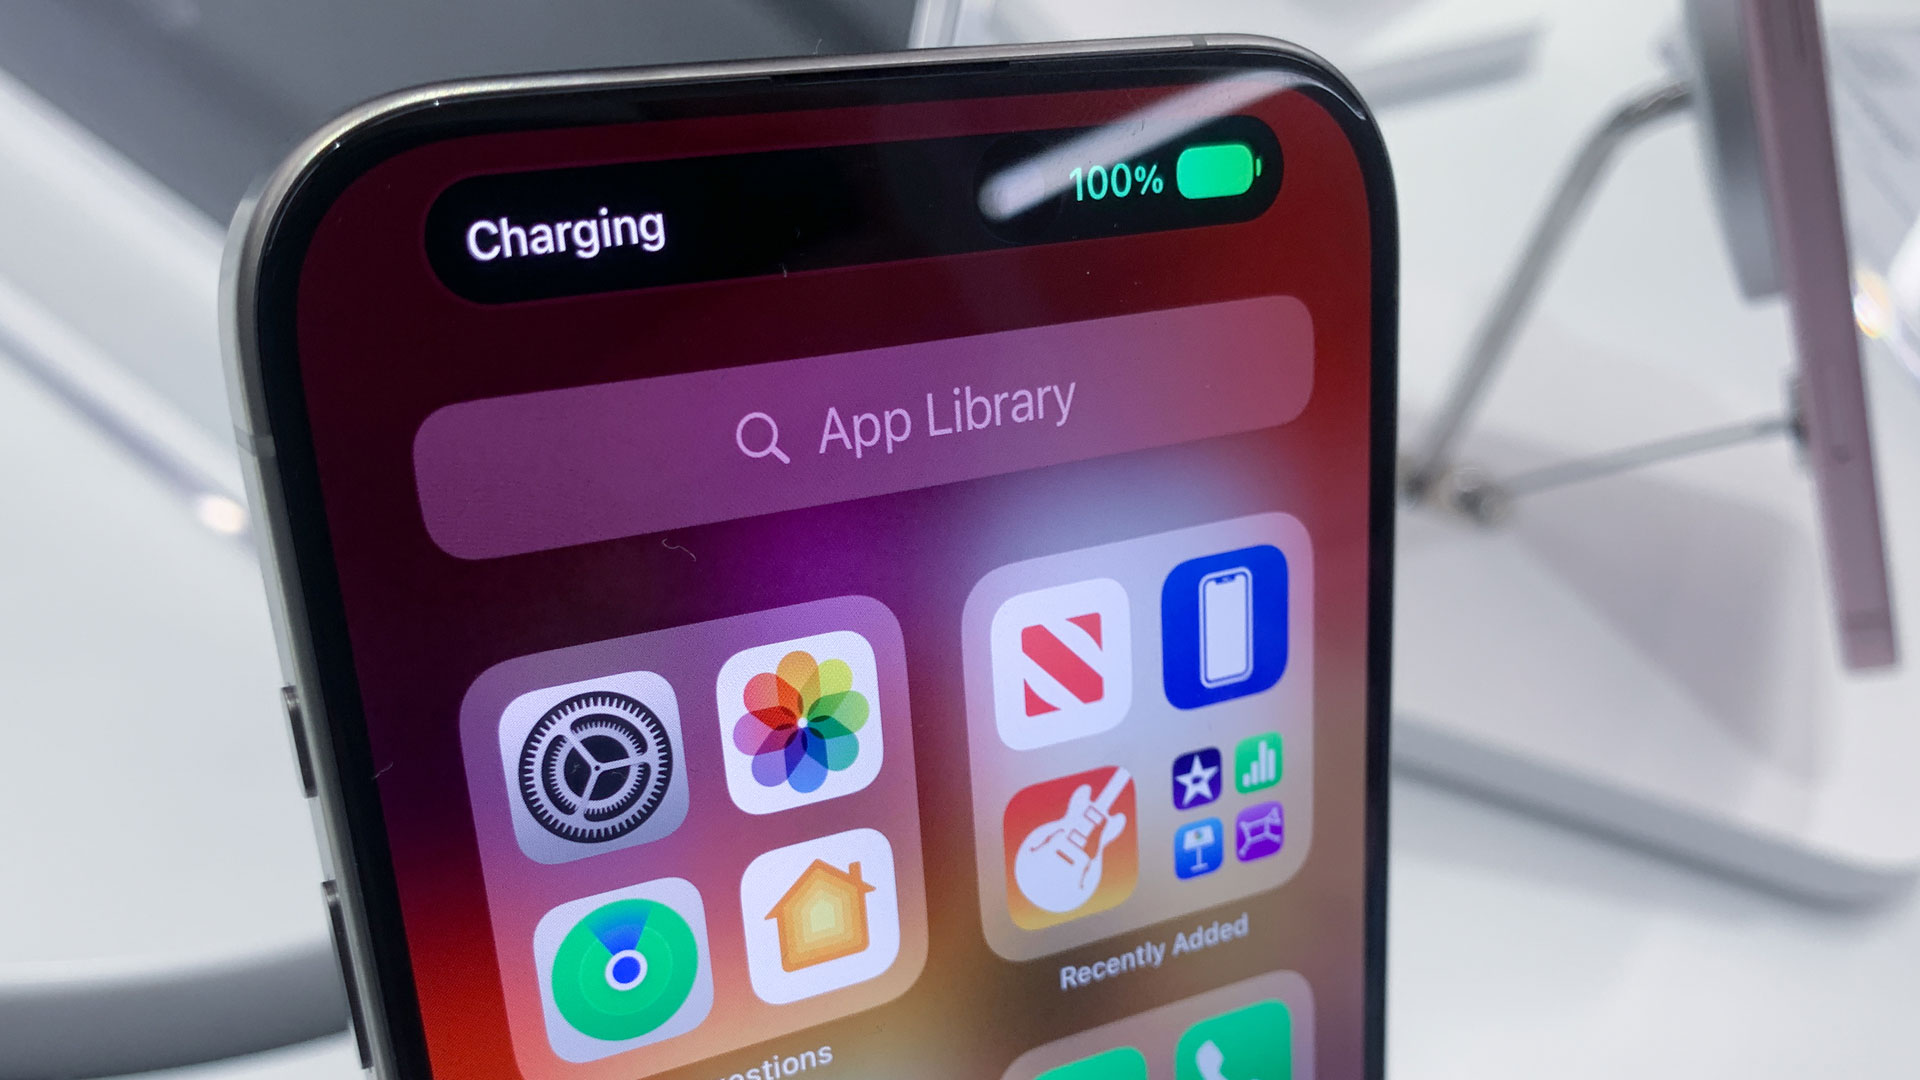 Apple issues surprise iPhone battery boost update – and it’ll save users money from expensive upgrades [Video]